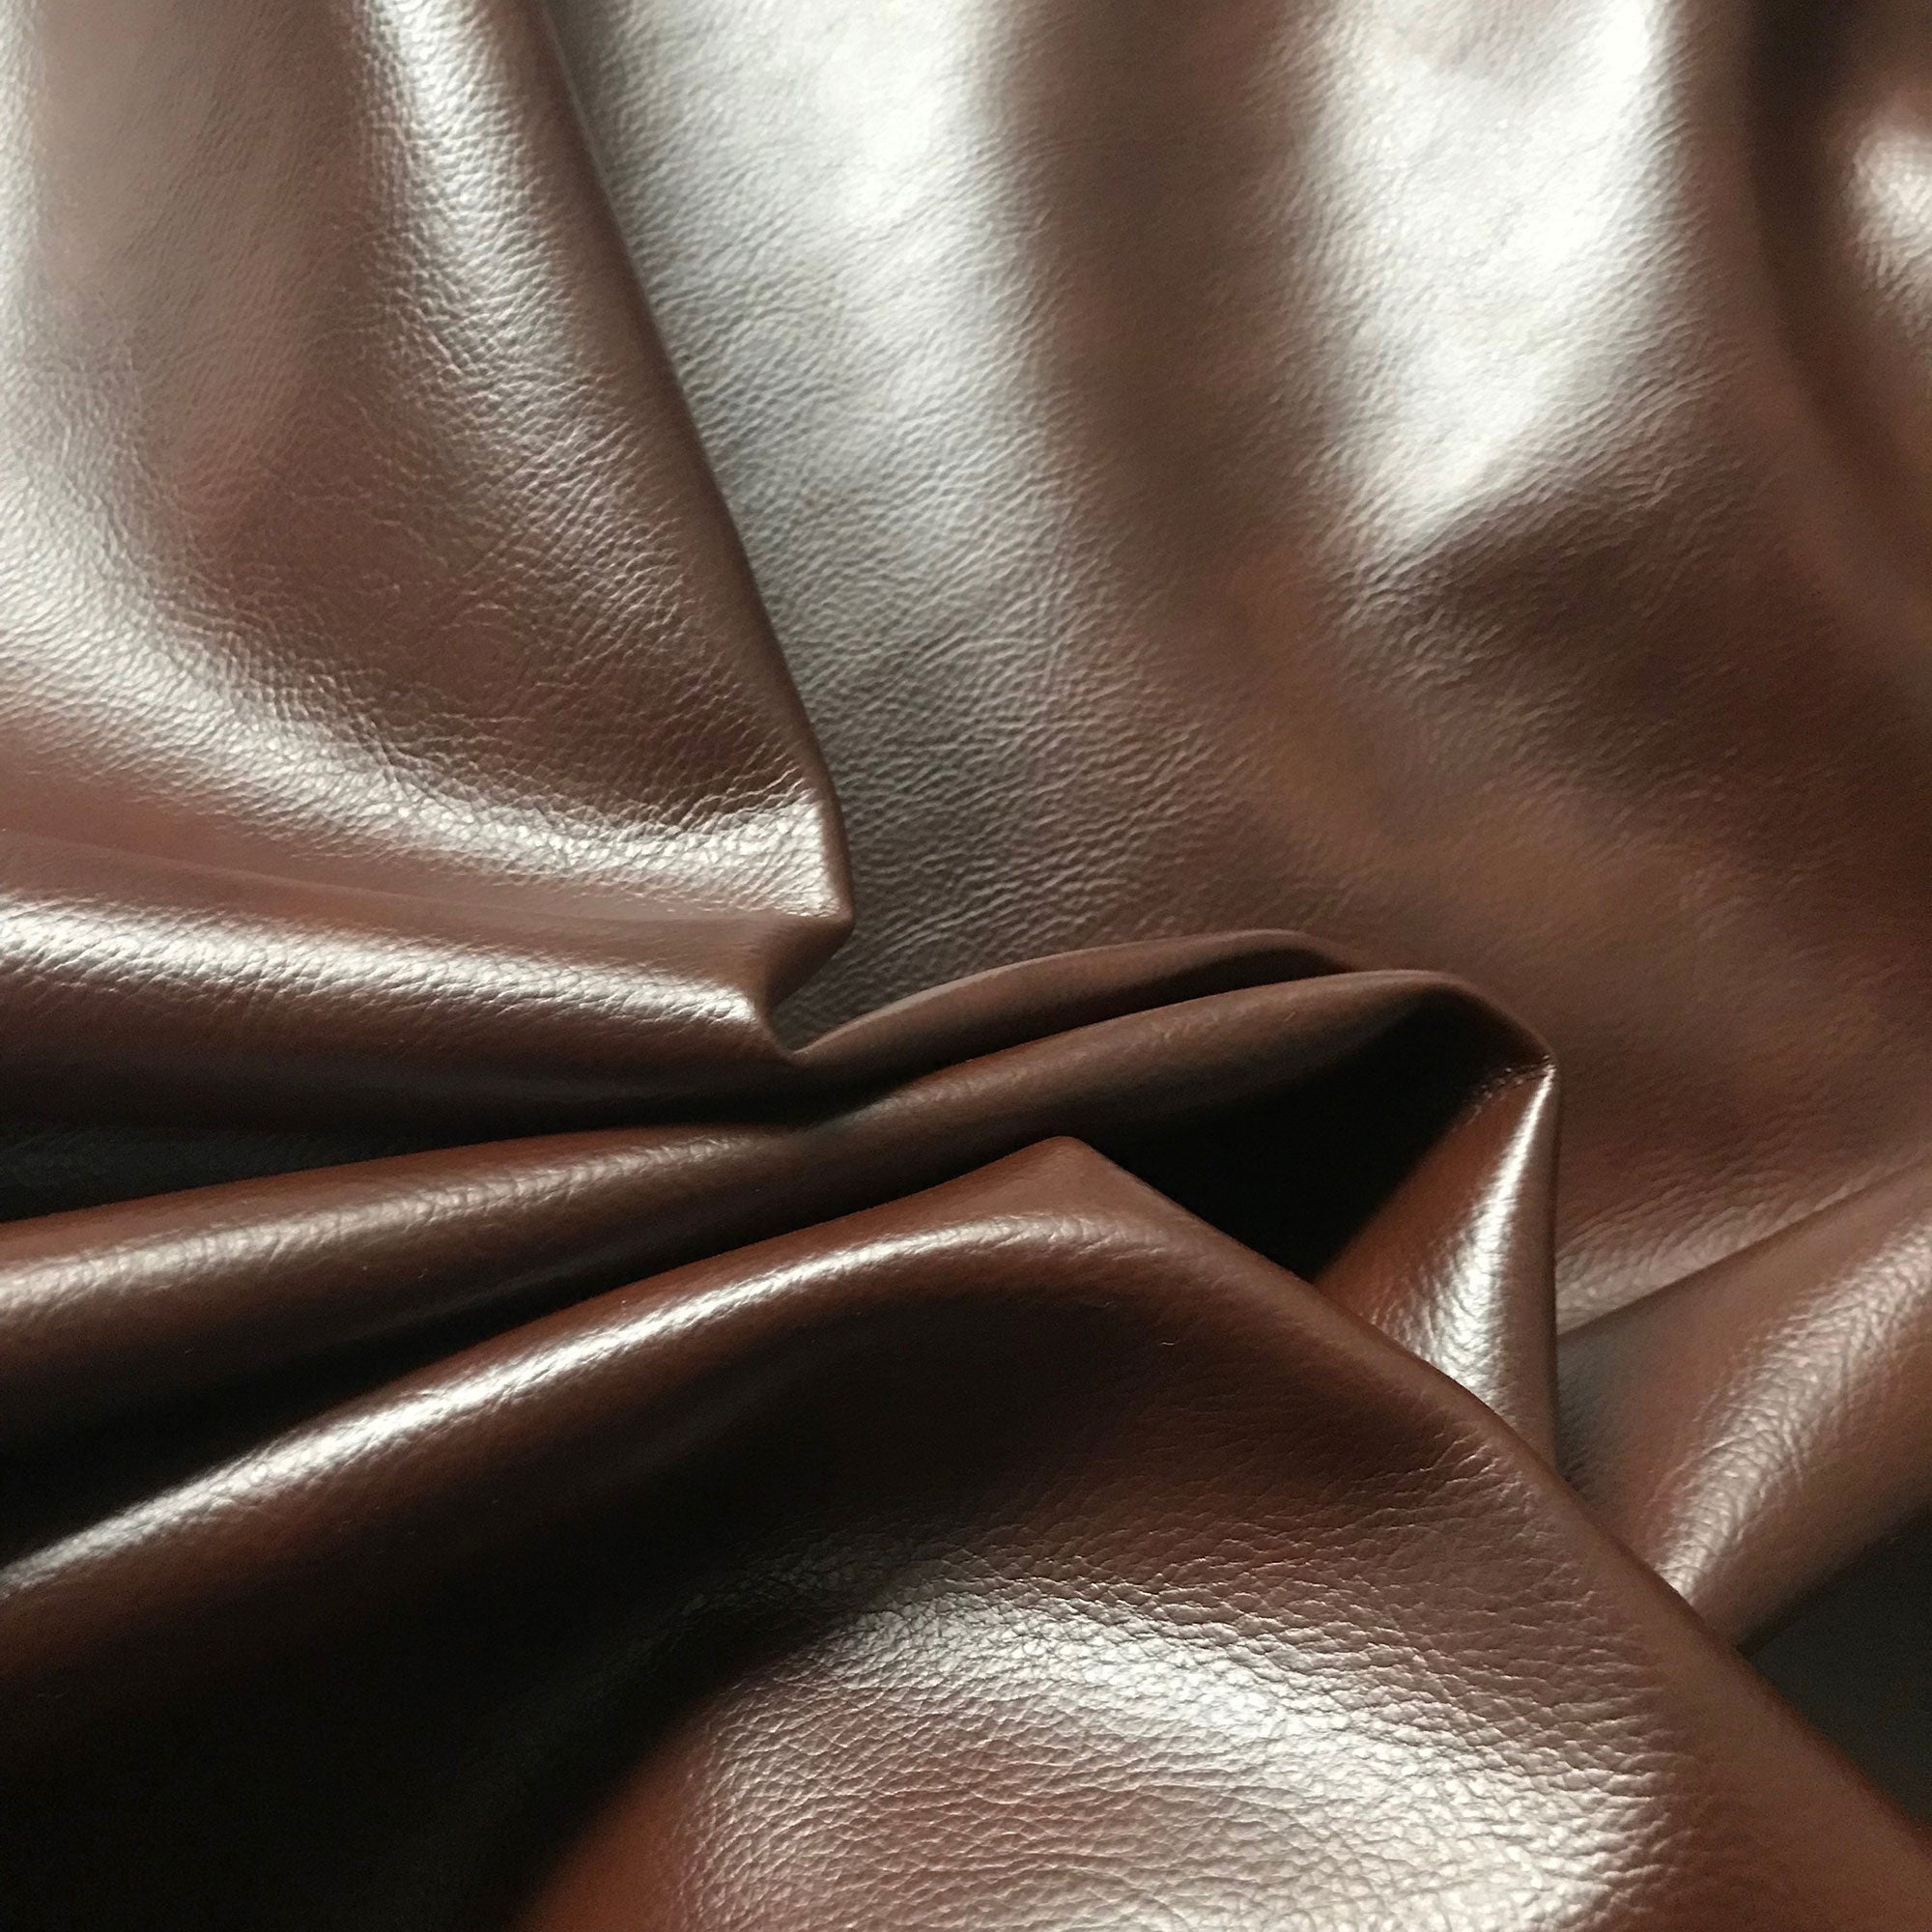 Brown Luxe Solid Faux Leather Upholstery Fabric 54 – Plankroad Home Decor